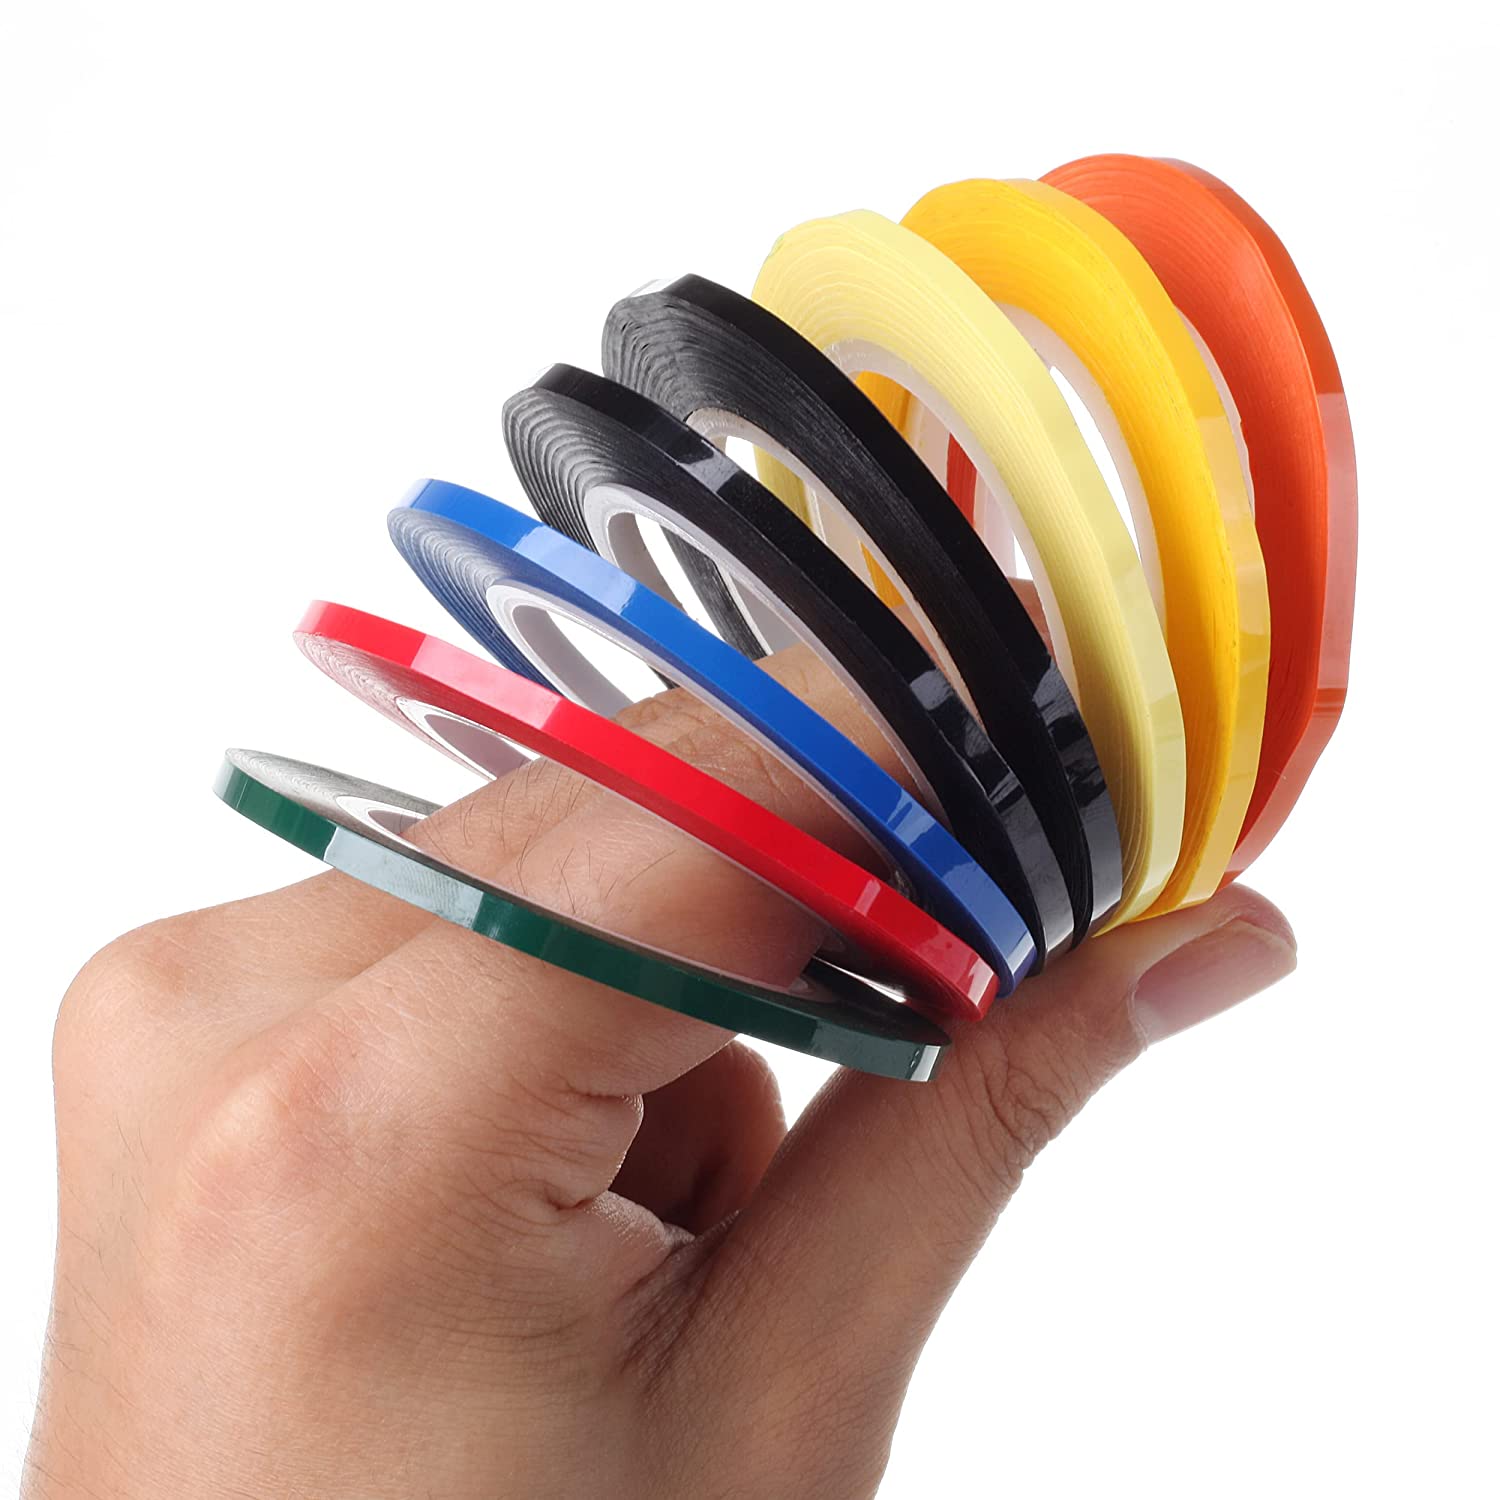 Mr. Pen- Whiteboard Tape, 8 Pack, Assorted Colors, Thin Tape for